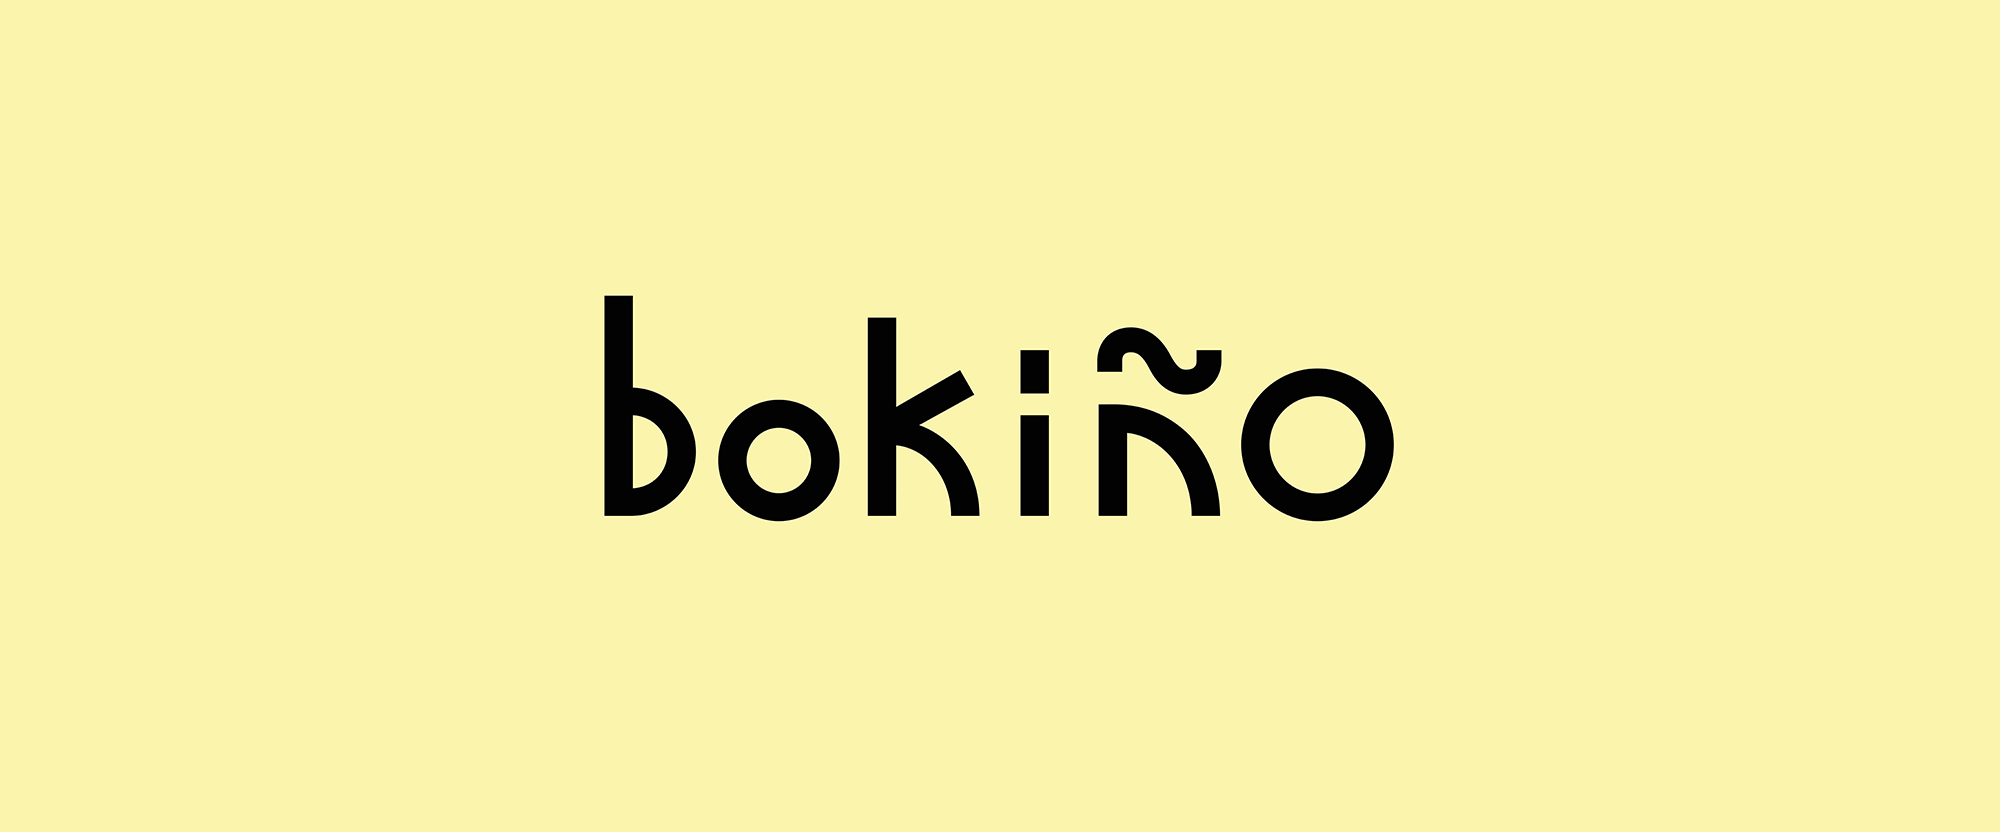 New Logo and Identity for Bokiño by Bedow